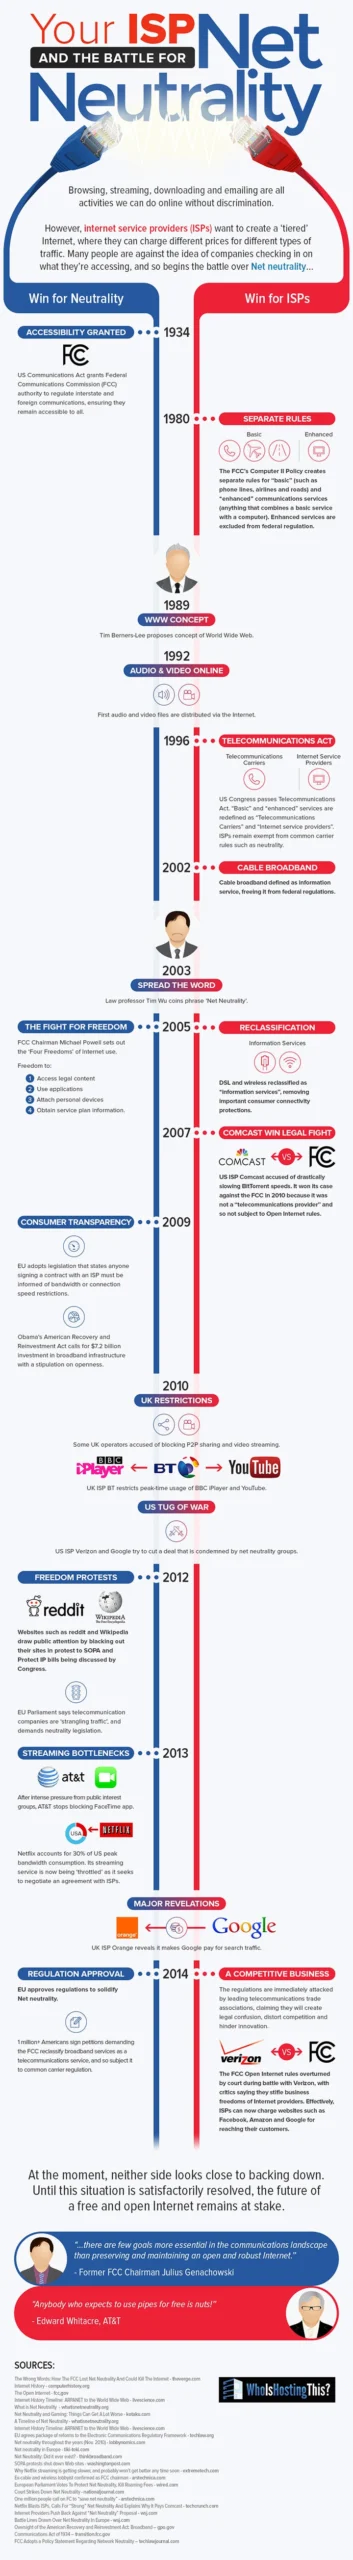 A Timeline Of Net Neutrality 1934 – 2014 [InfoGraphic]